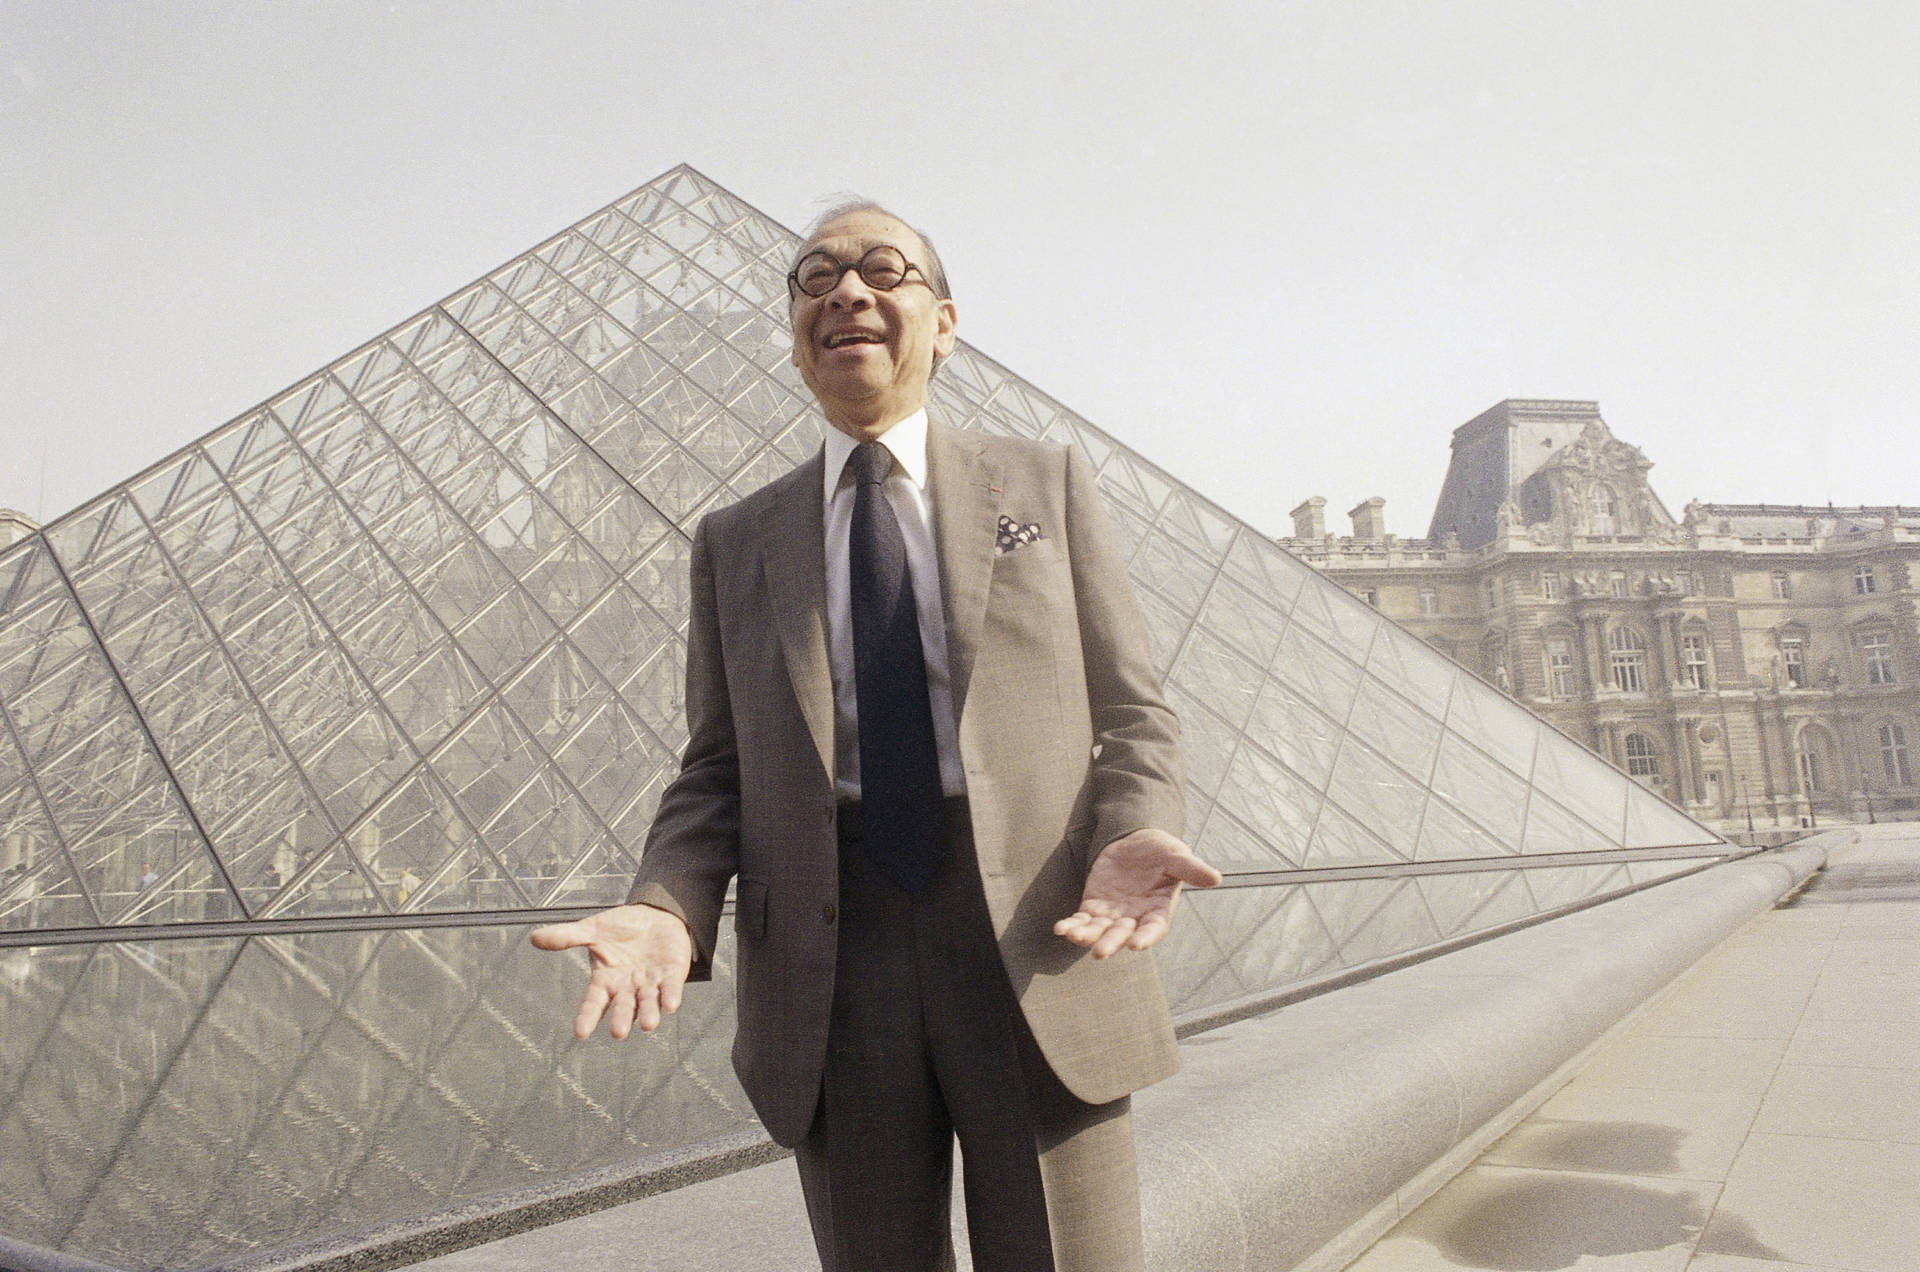 Architect I.M. Pei stands in front of the Louvre museum's glass pyramid in Paris, just before the structure's inauguration in March 1989.